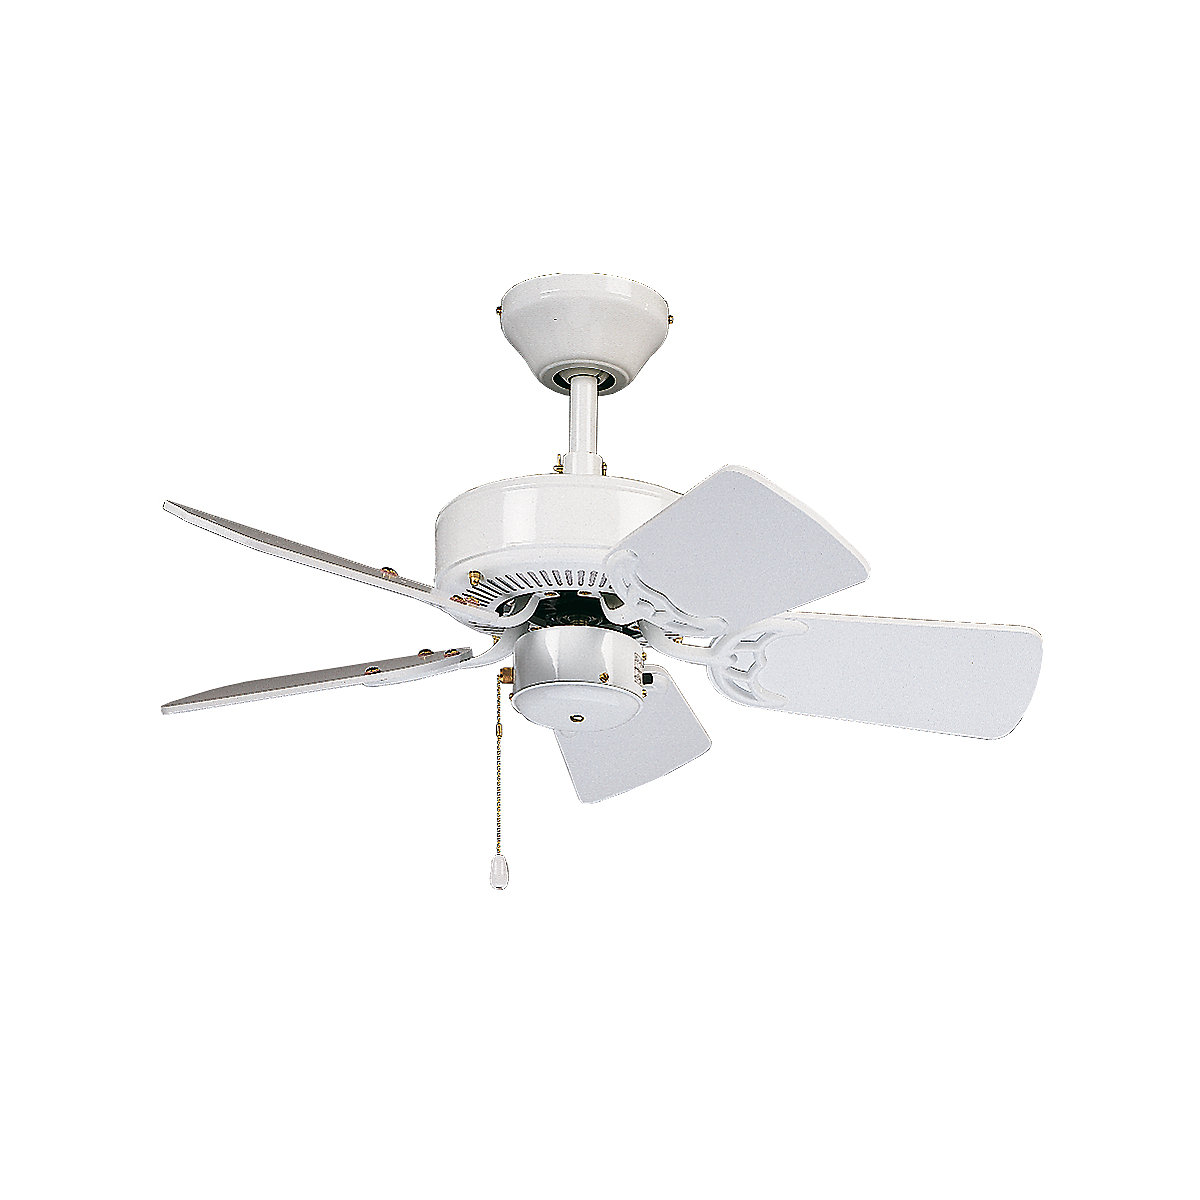 CLASSIC ROYAL ceiling fan, rotor blade Ø 750 mm, painted white-2